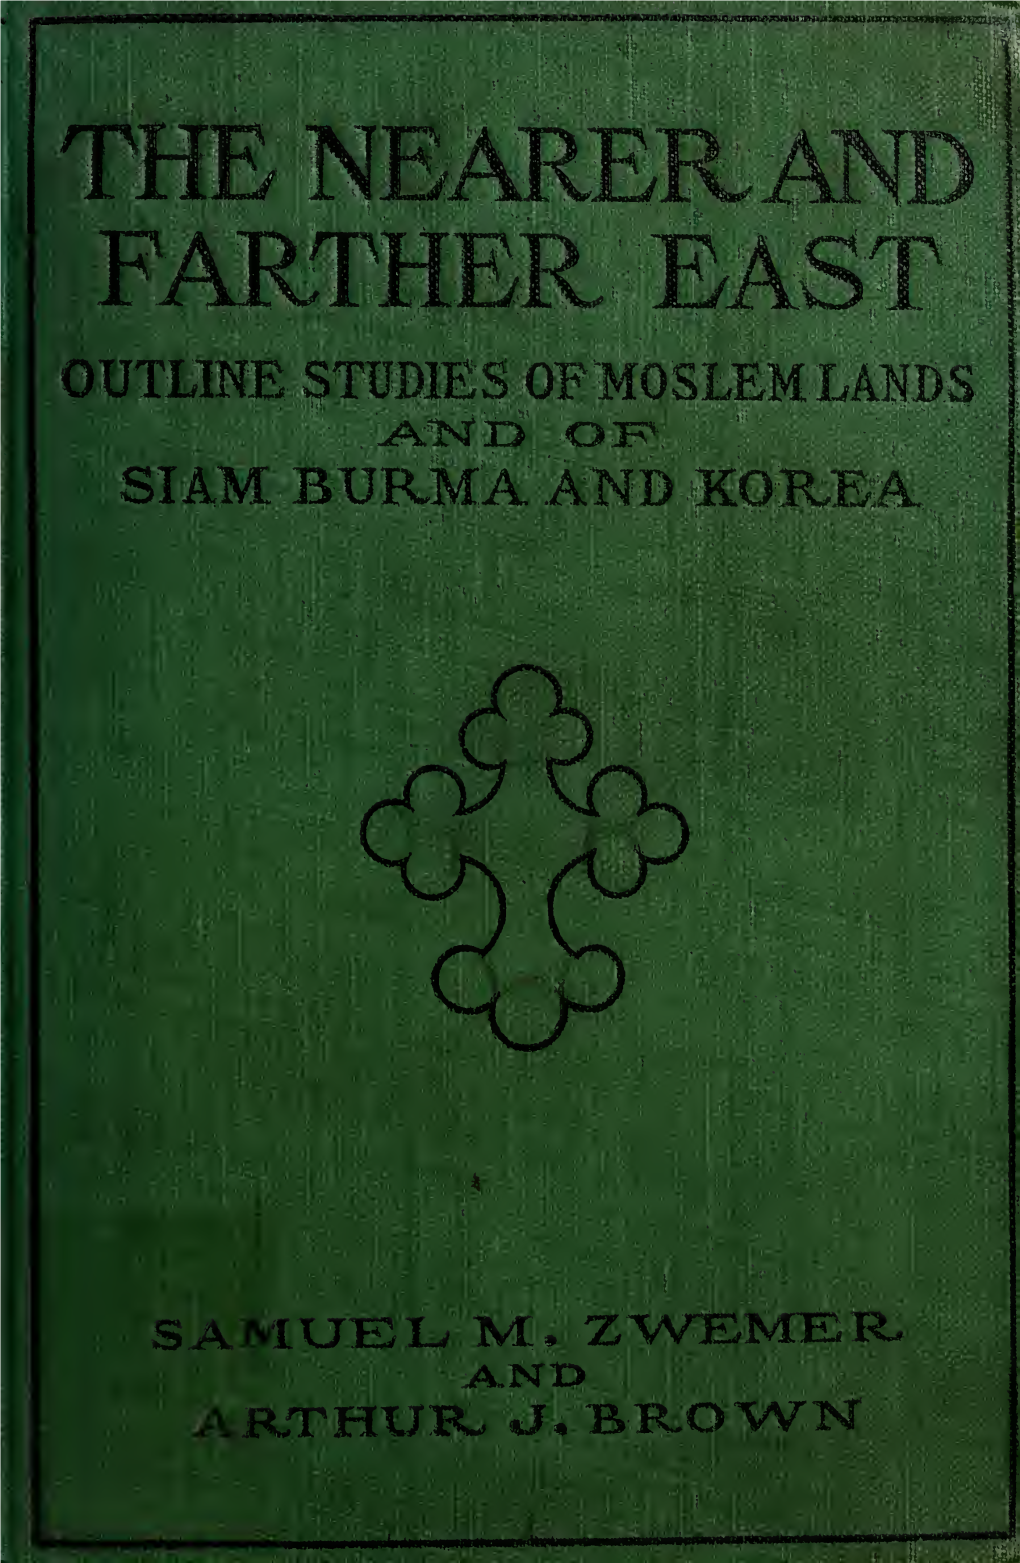 The Nearer and Farther East; Outline Studies of Moslem Lands and Of